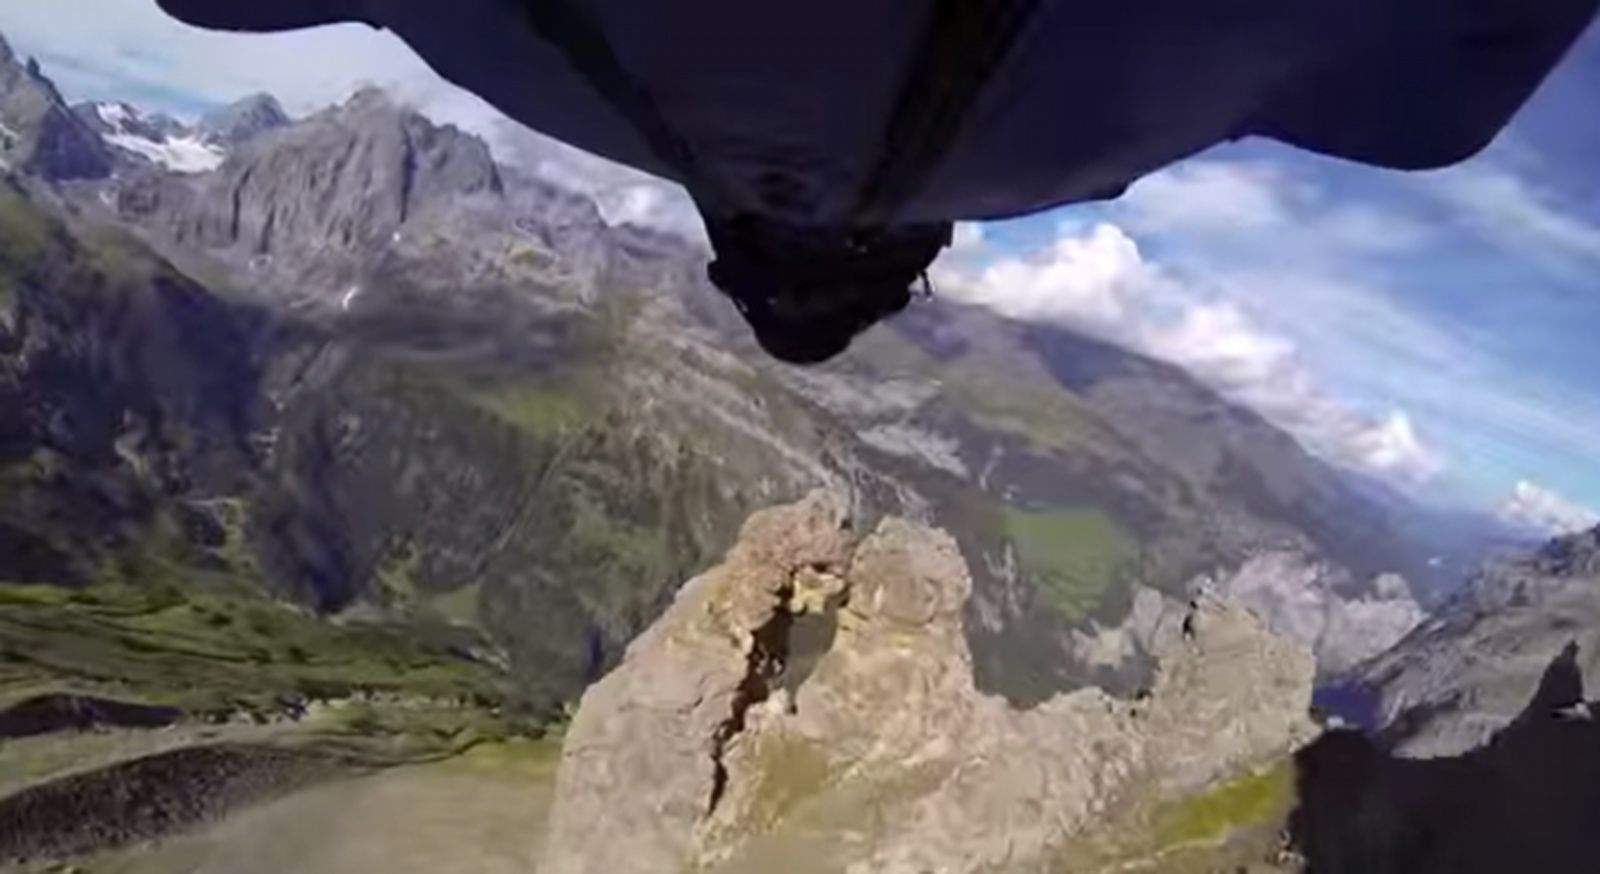 Uli Emanuele aims for the tiny opening of this rock formation in Switzerland.